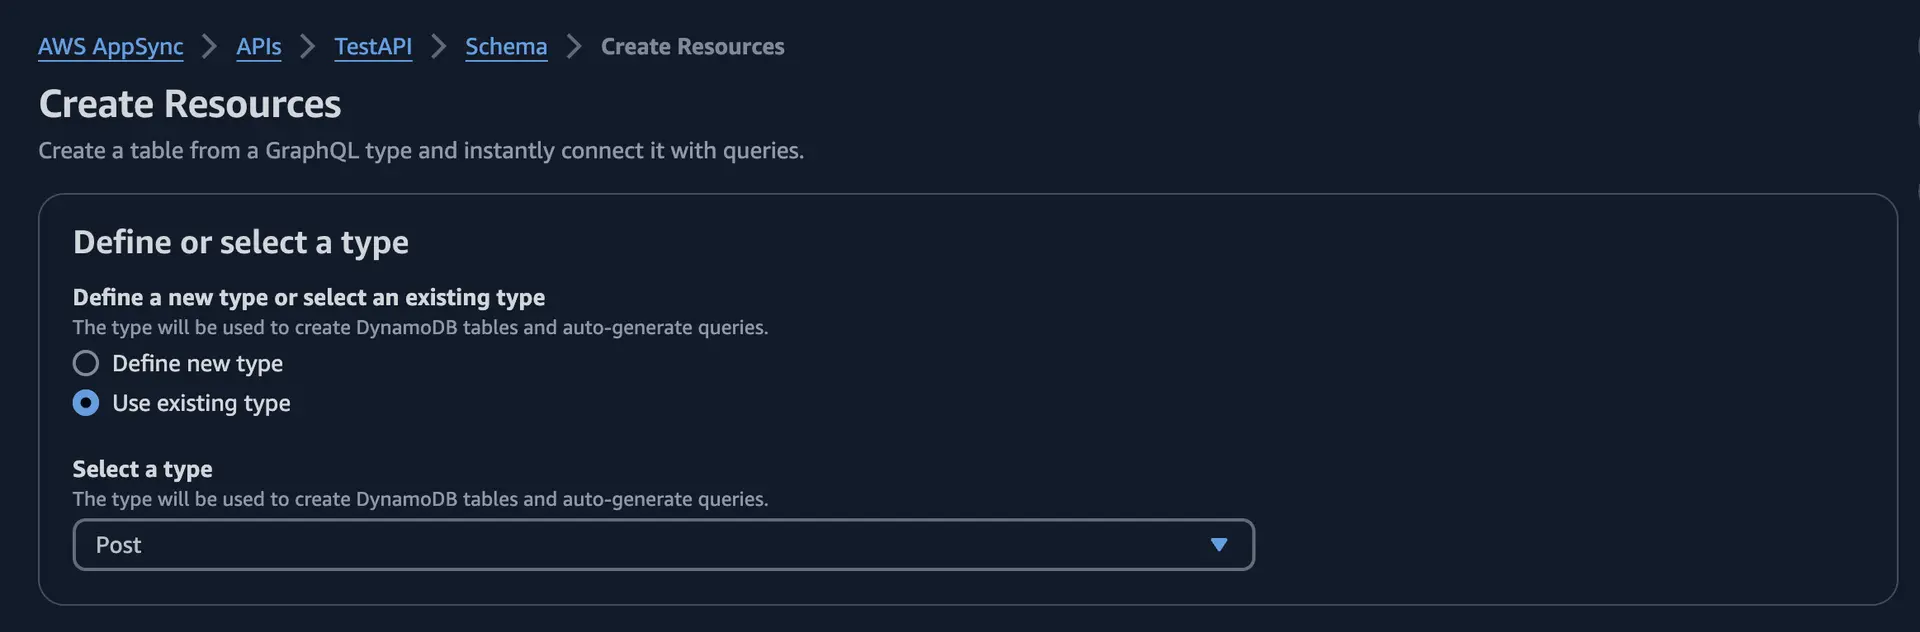 AWS AppSync console, "Create Resources" page. A prominent heading reads "Create Resources". Radio buttons are presented for either defining a new type or selecting an existing type for the table creation.